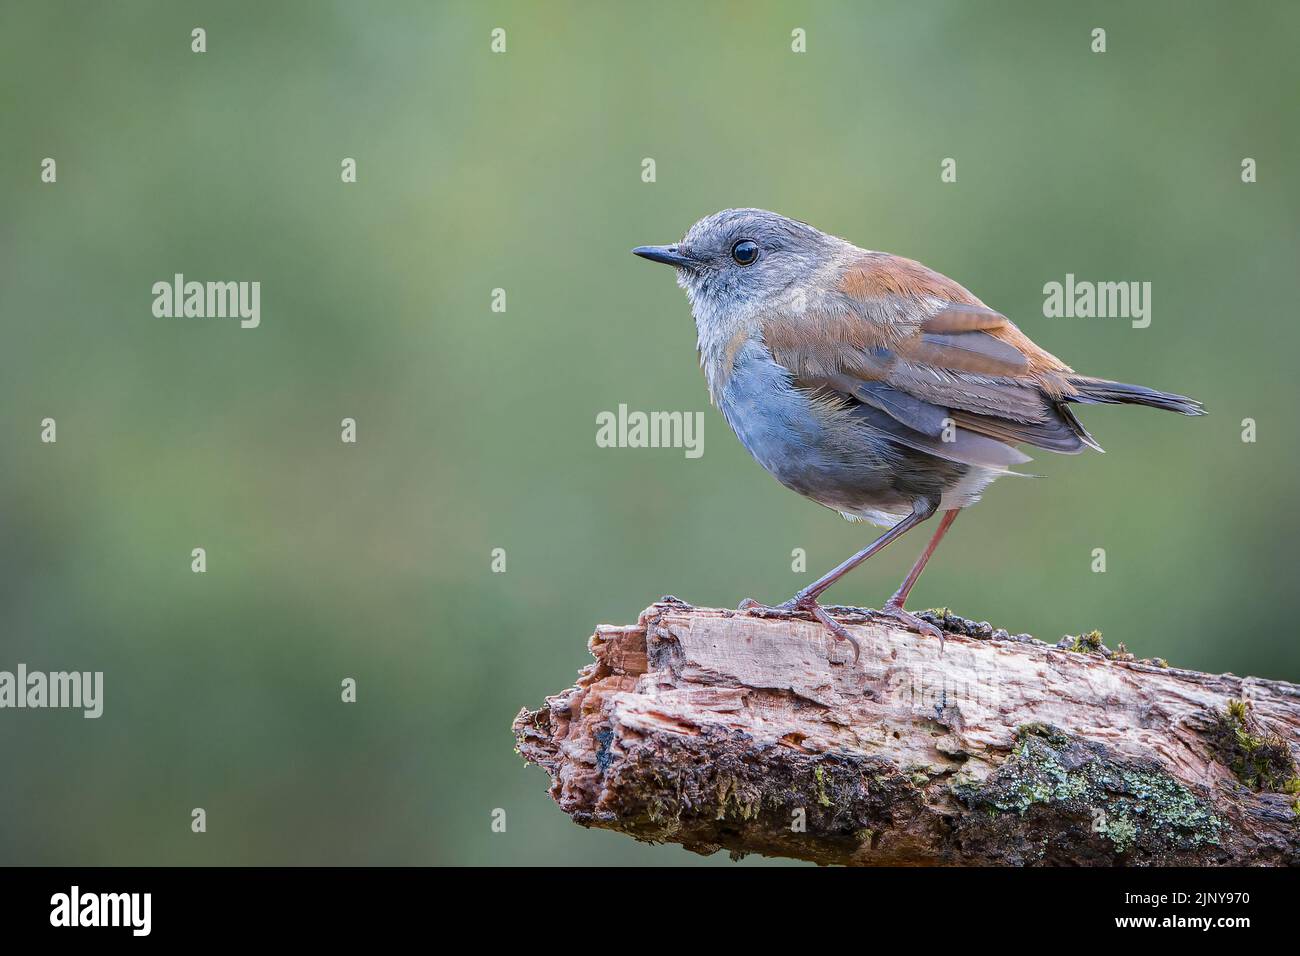 Black-billed nightingale-thrush, Catharus gracilirostris, majestically perched on a branch in Costa Rica Stock Photo